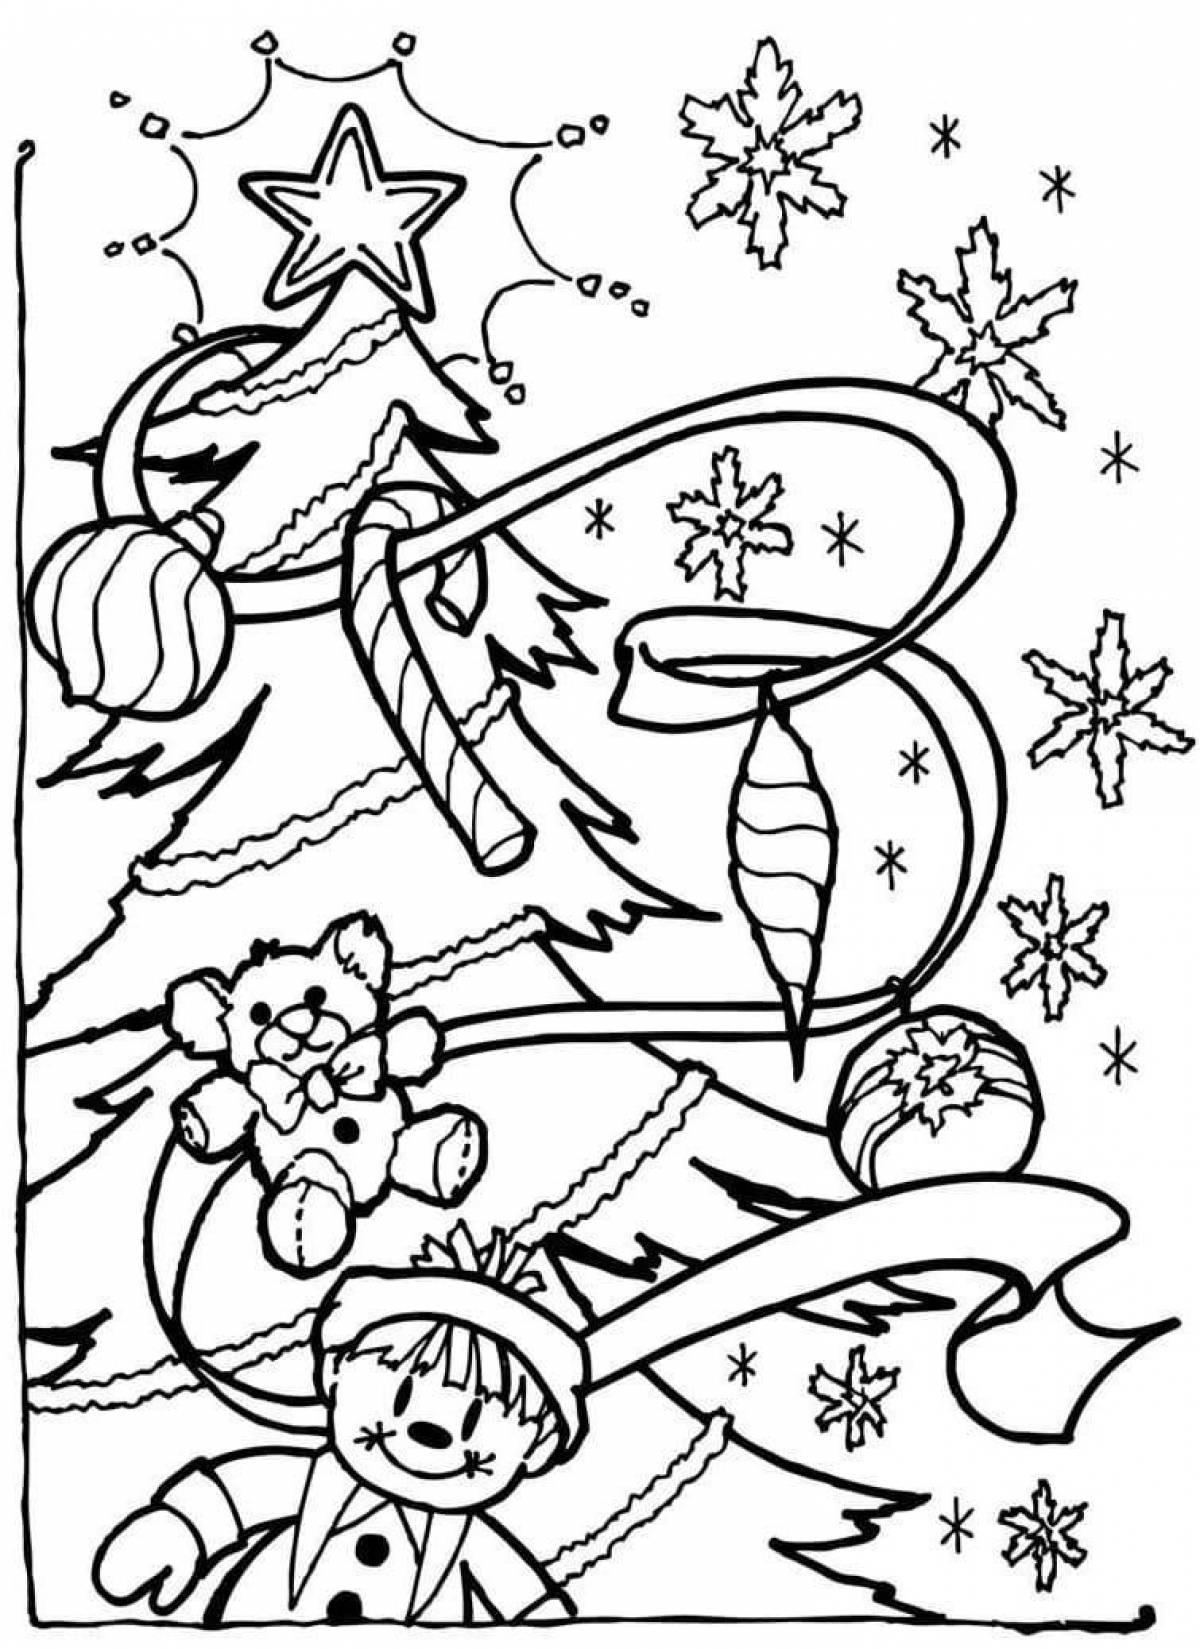 Colorful Christmas Eve coloring book